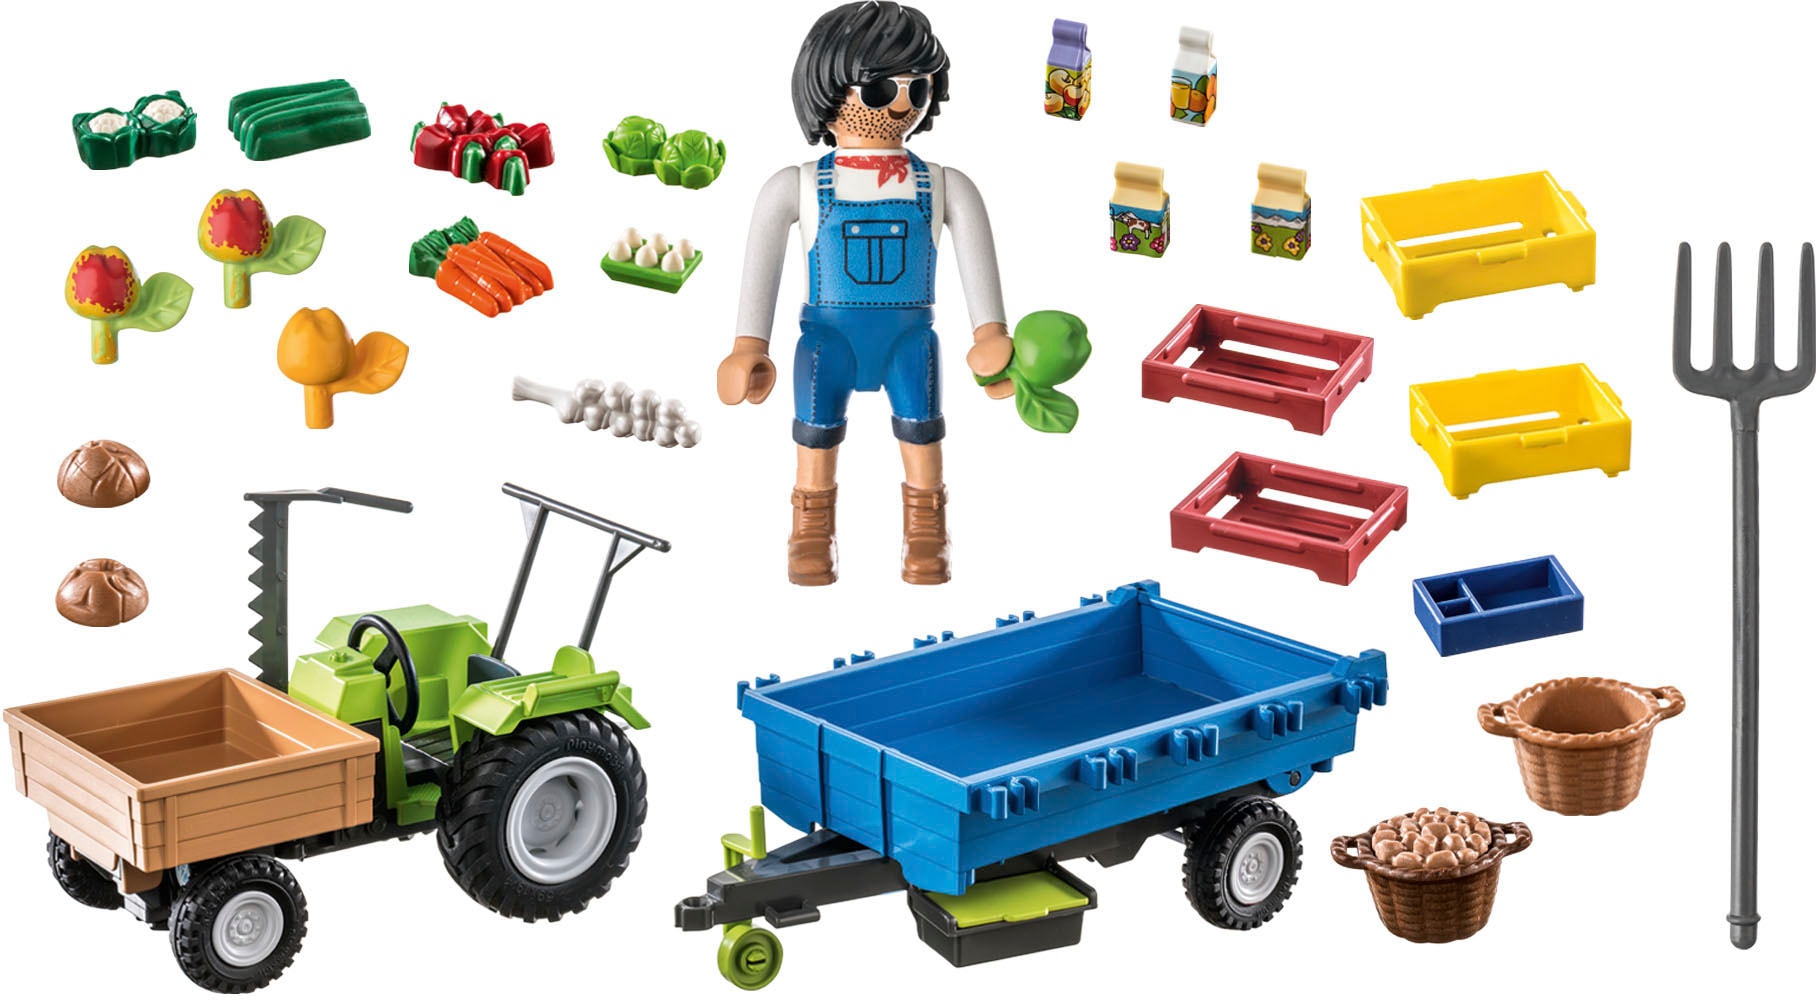 Playmobil® Konstruktions-Spielset »Traktor mit Hänger (71249), Country«, teilweise aus recyceltem Material; Made in Germany